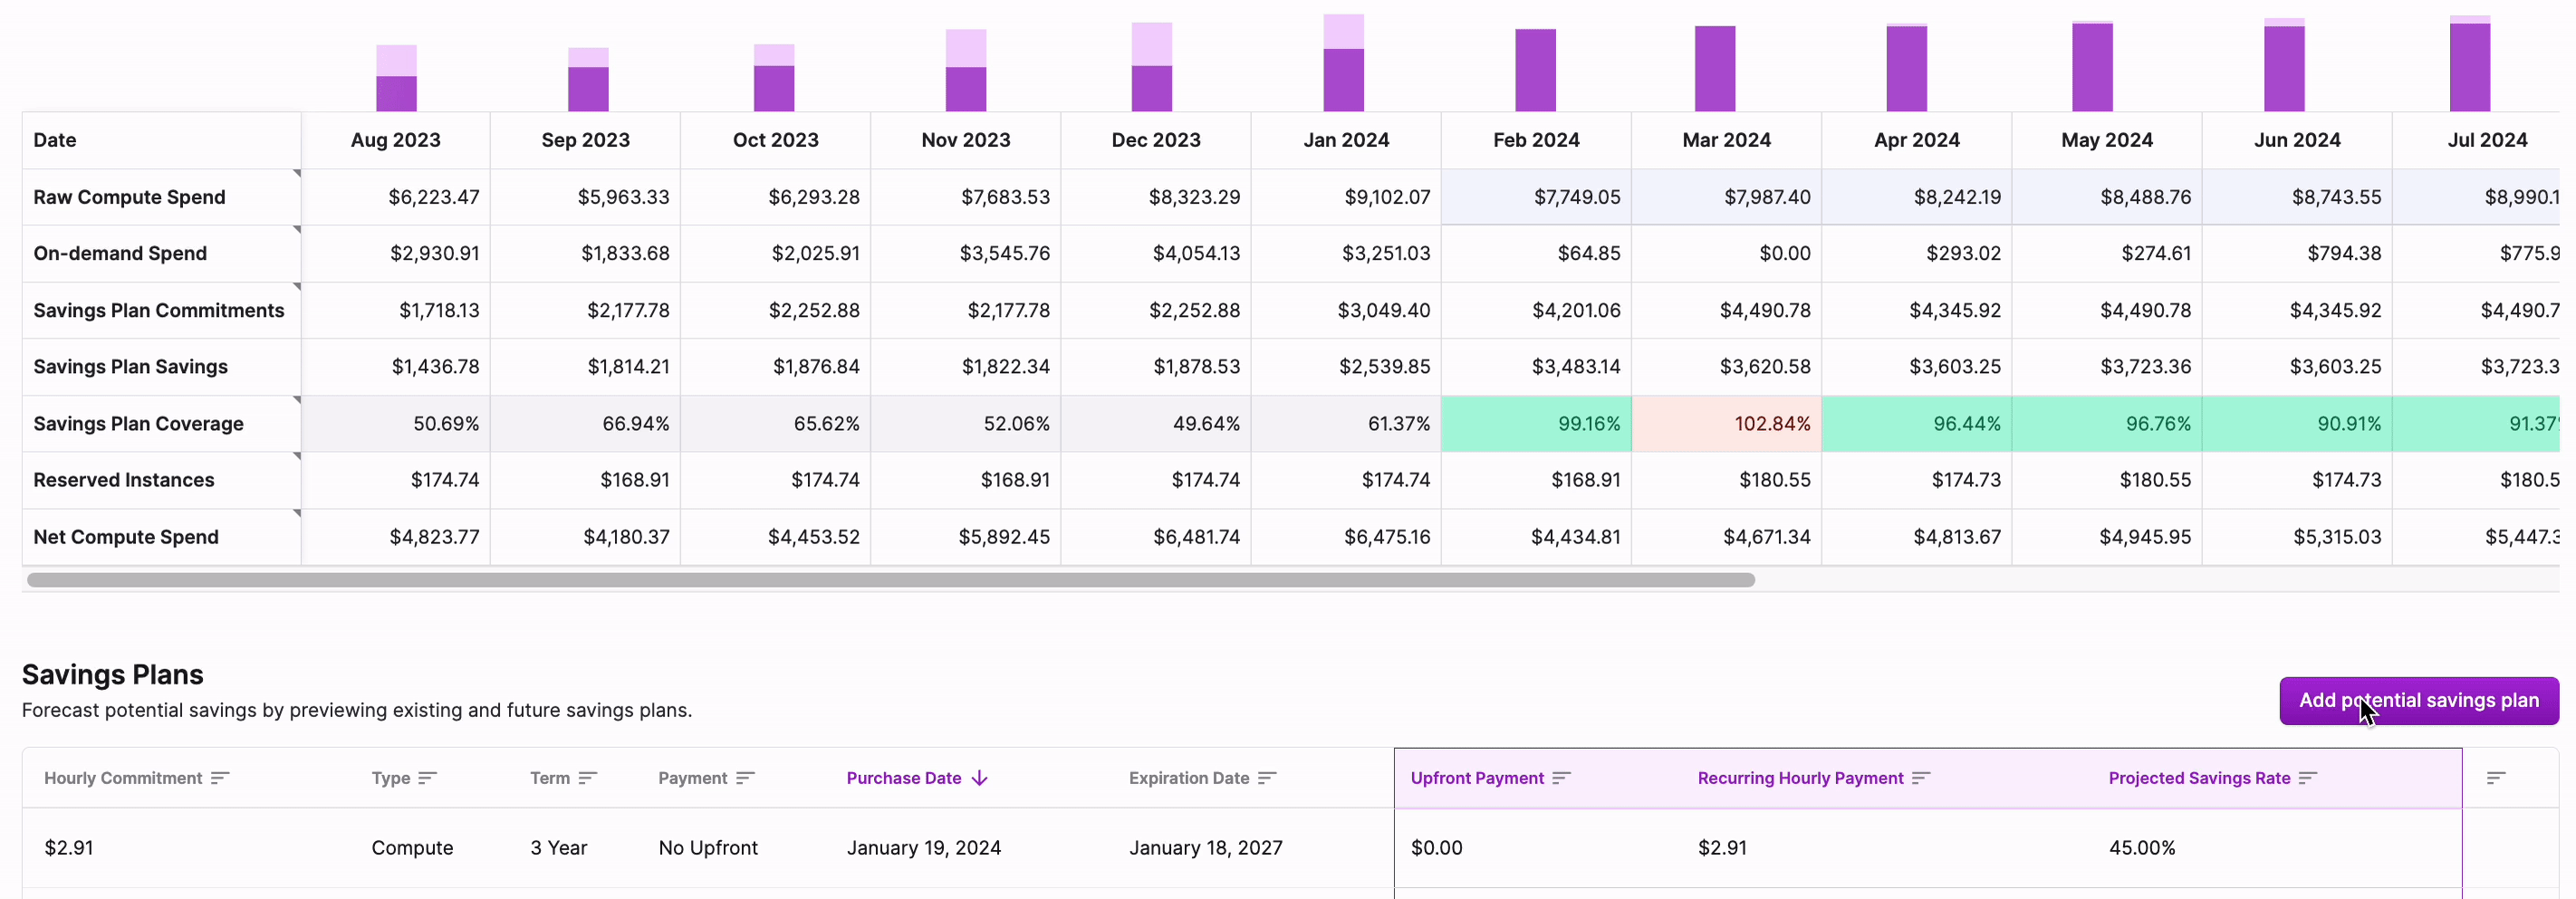 A savings model option is added to the Savings Planner and an hourly commit is entered. The table at the top is updated automatically to show new predicted spend and savings.